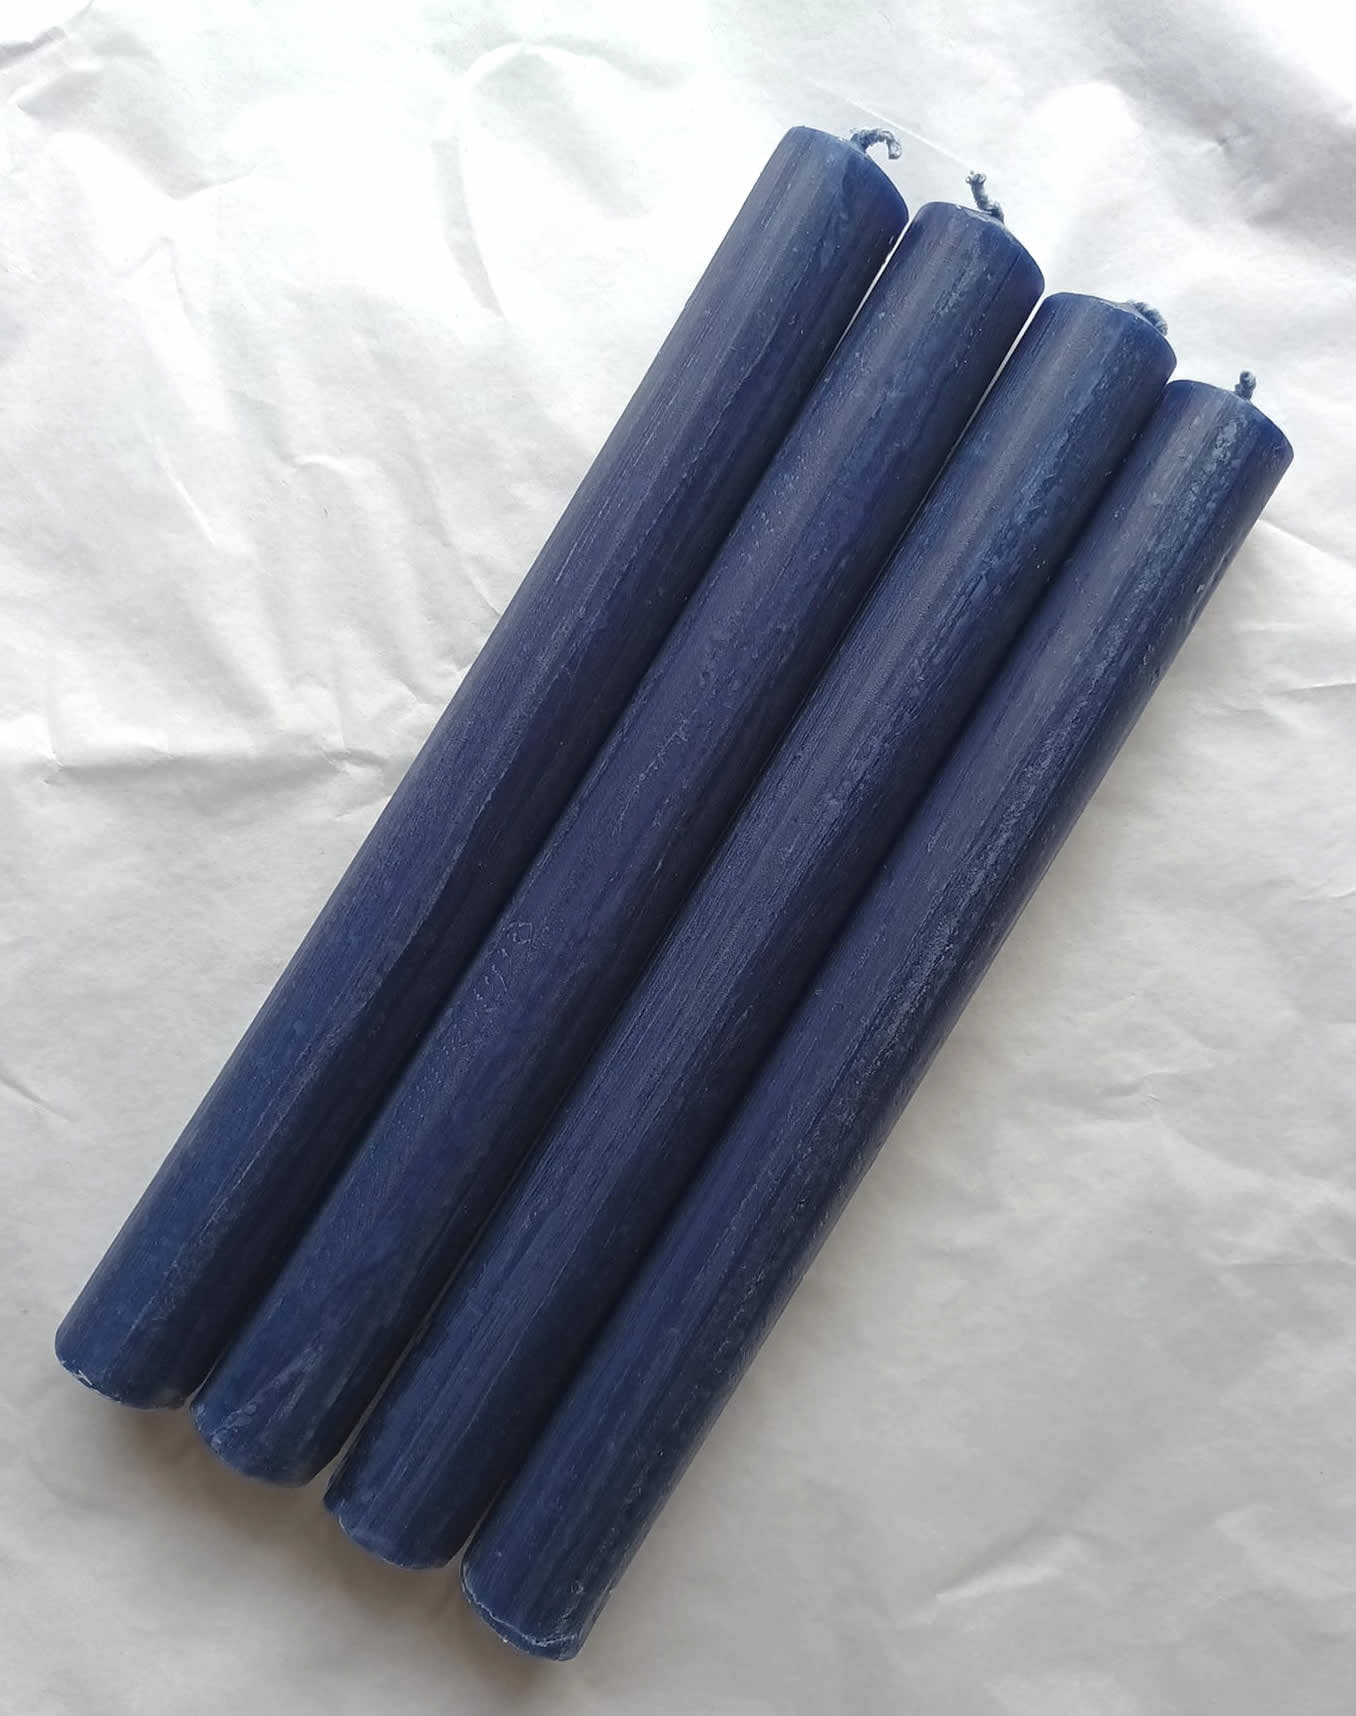 Solid Colour Dark Blue 8 Inch Rustic Dinner Candles